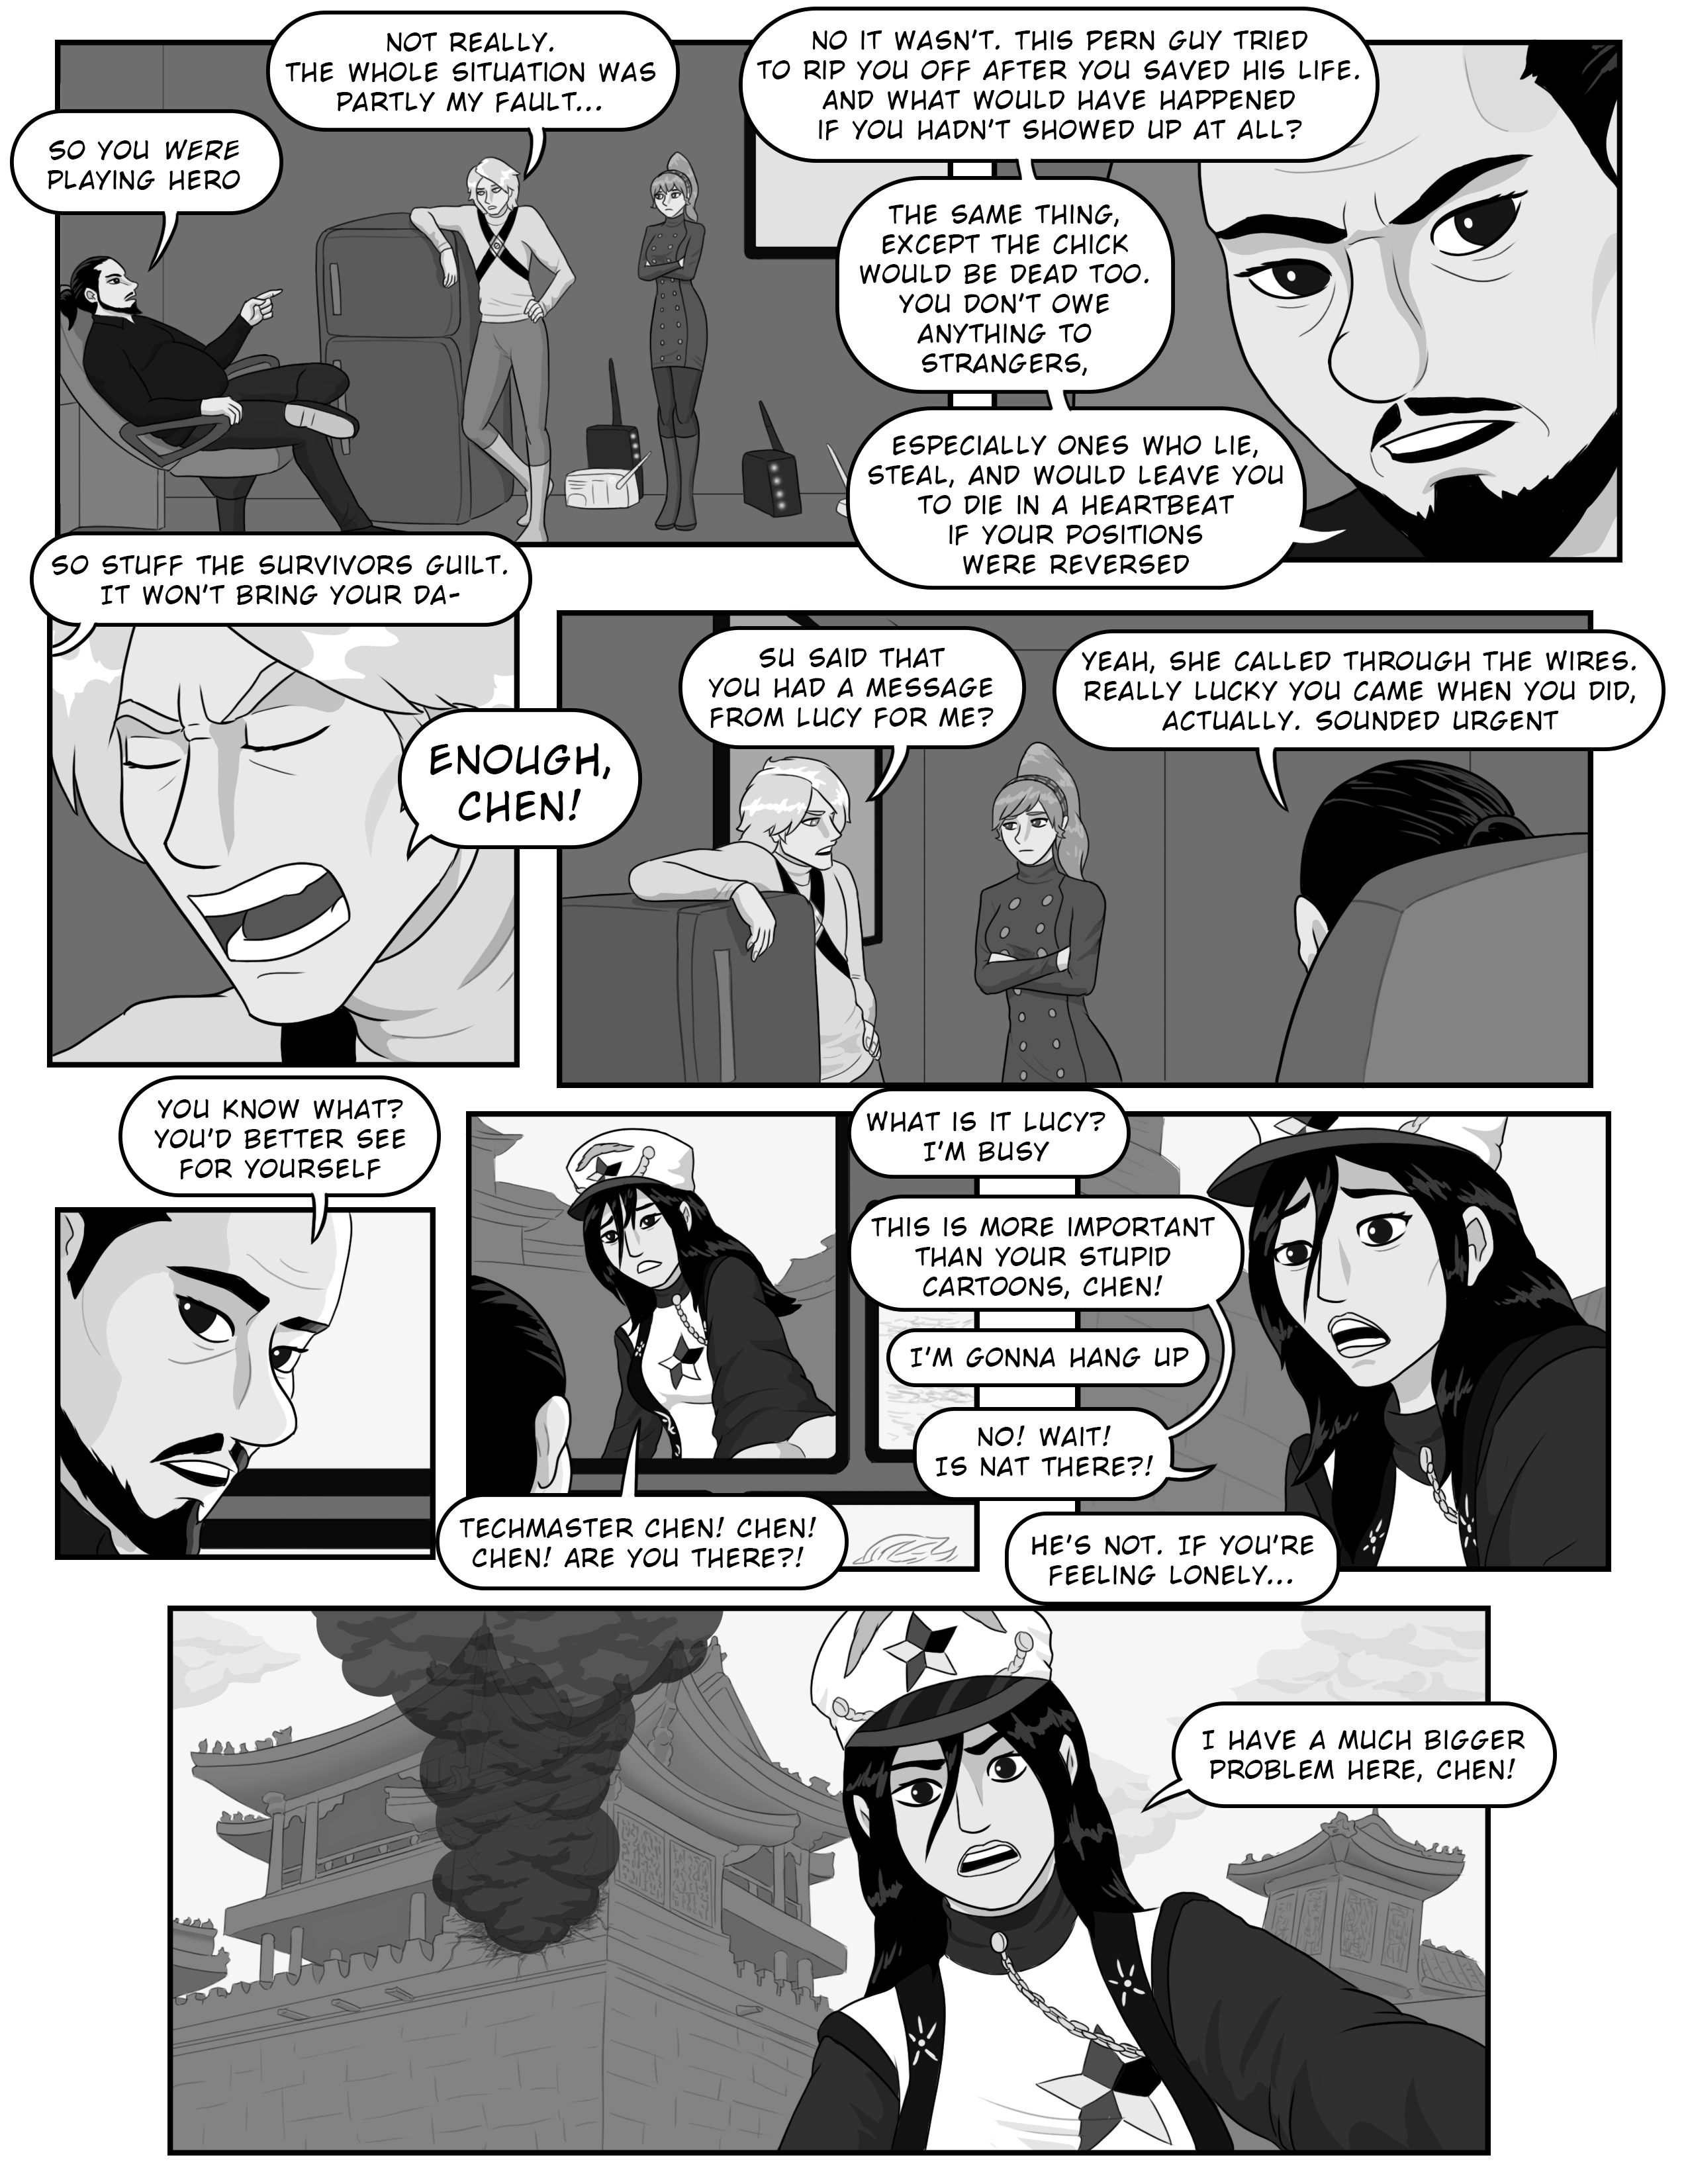 Chapter 2 Page 14